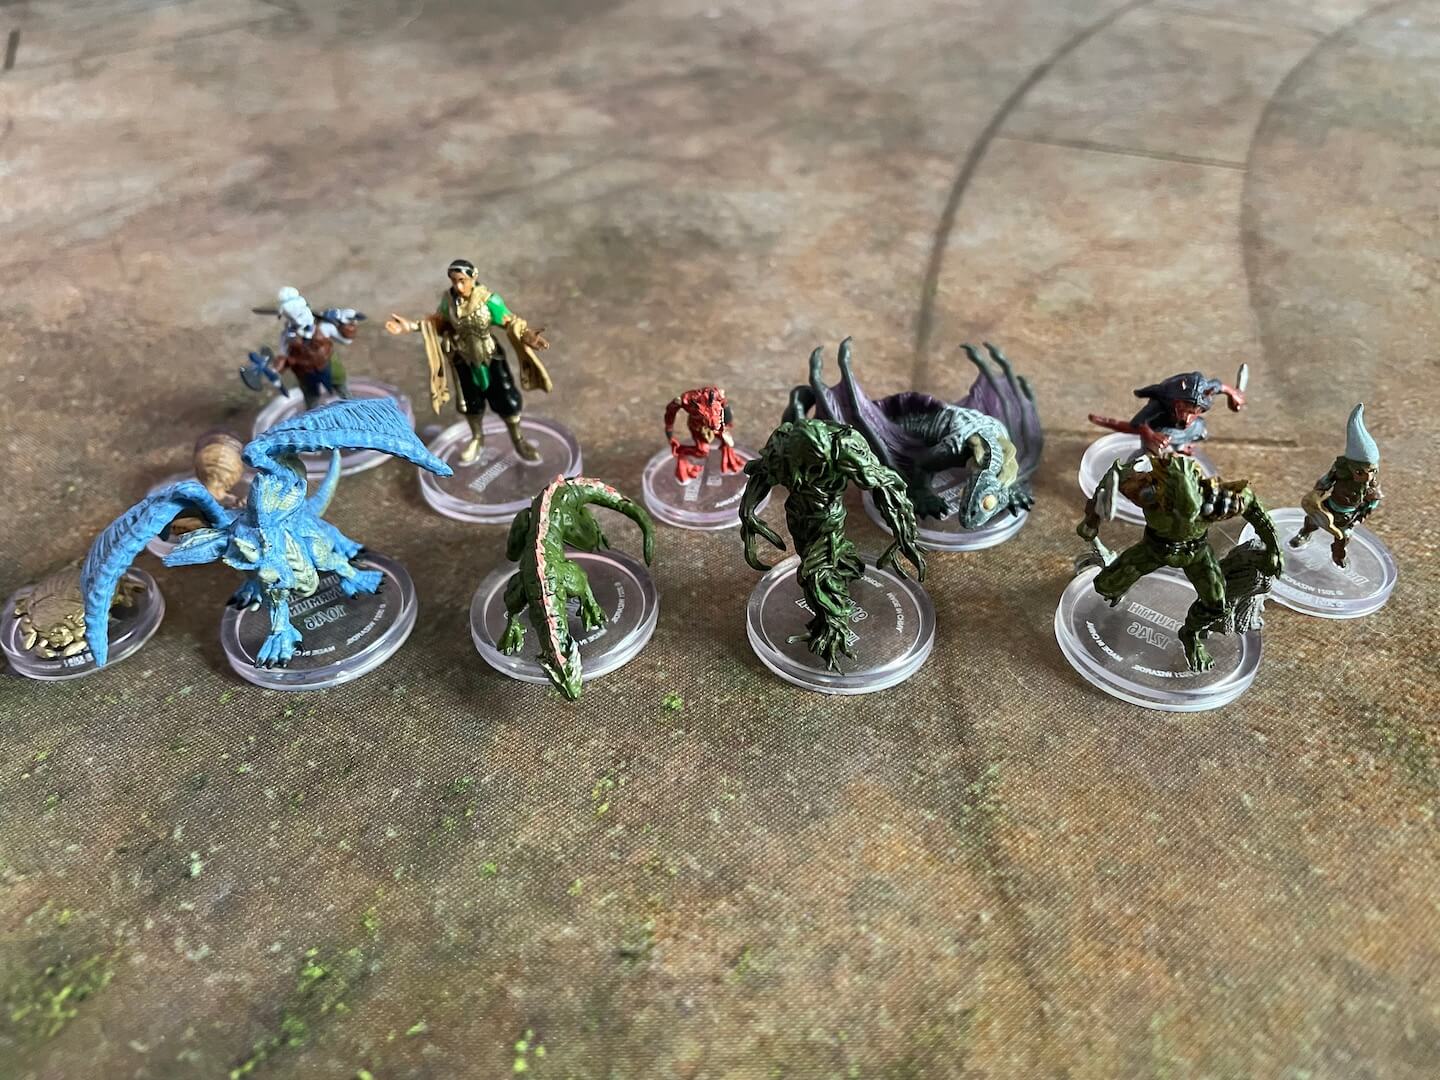 The common miniatures from Fizban and the crew pose for a pic from the Fizban's Treasury of Dragons Collector's Box